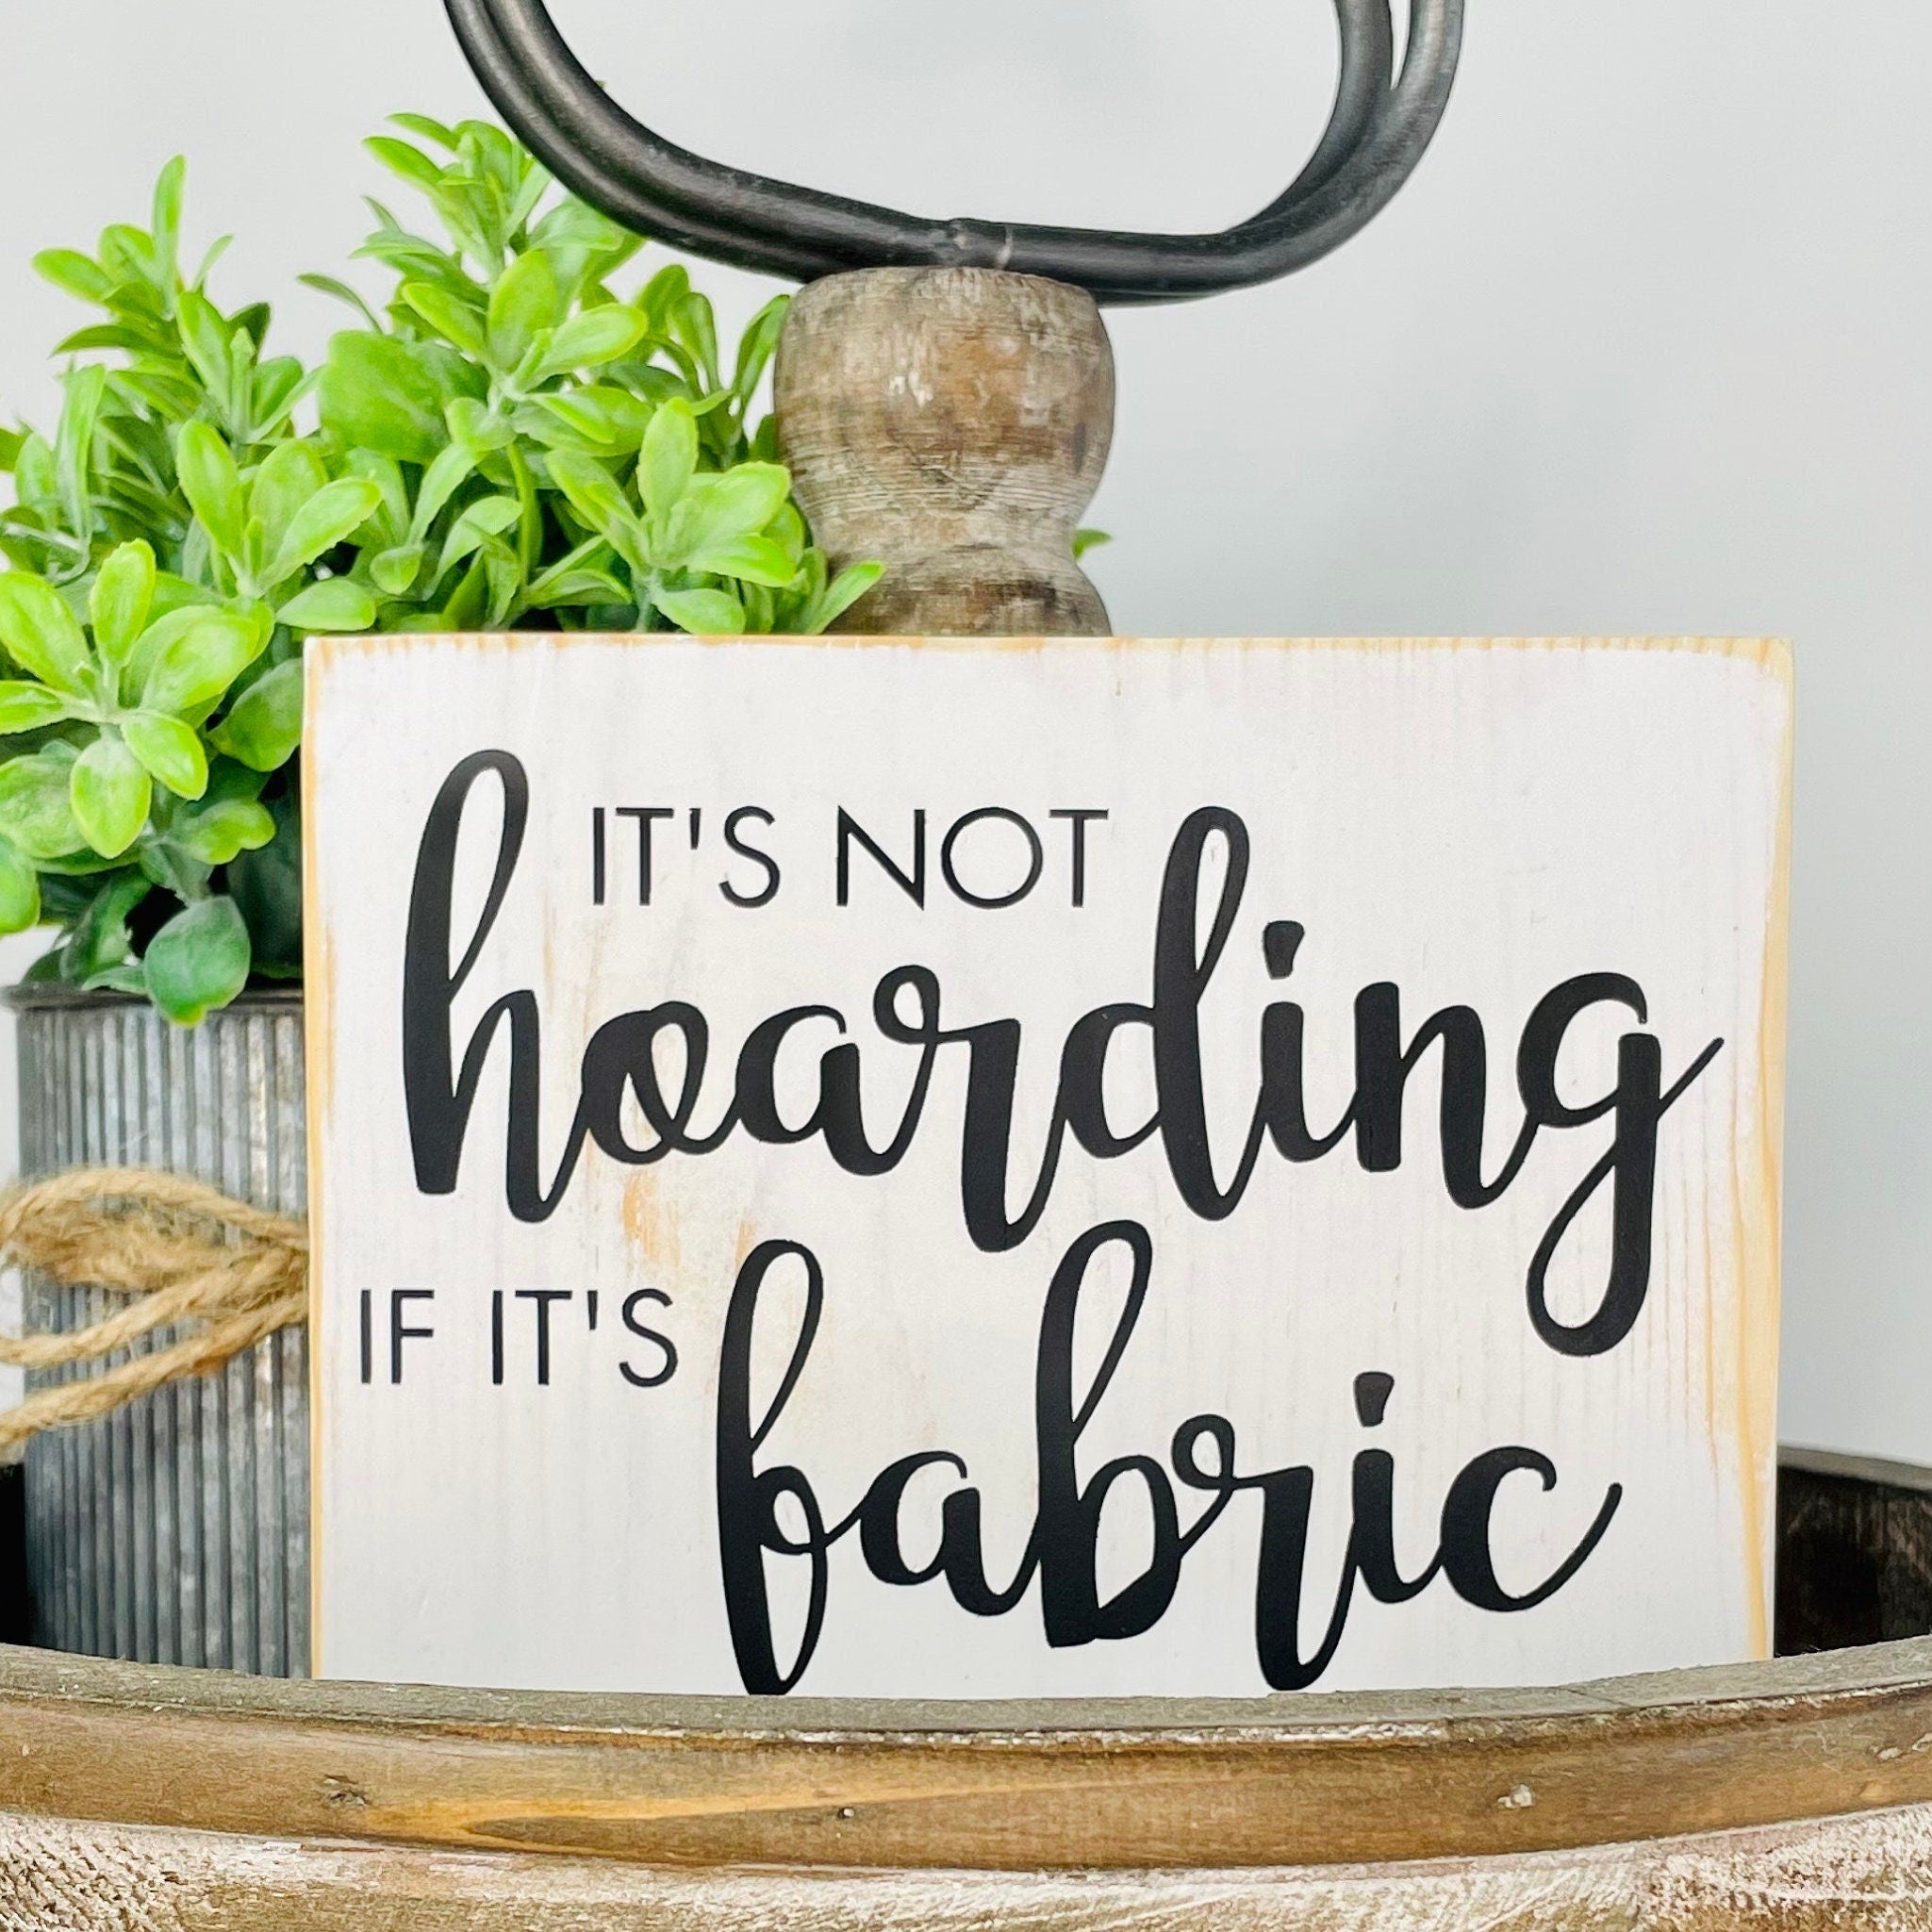 a small wood rectangular sign painted white with black lettering that reads "it's not hoarding if it's fabric". The words "hoarding" and "fabric" are in a large script font. The other words are in a thin font, all caps. 